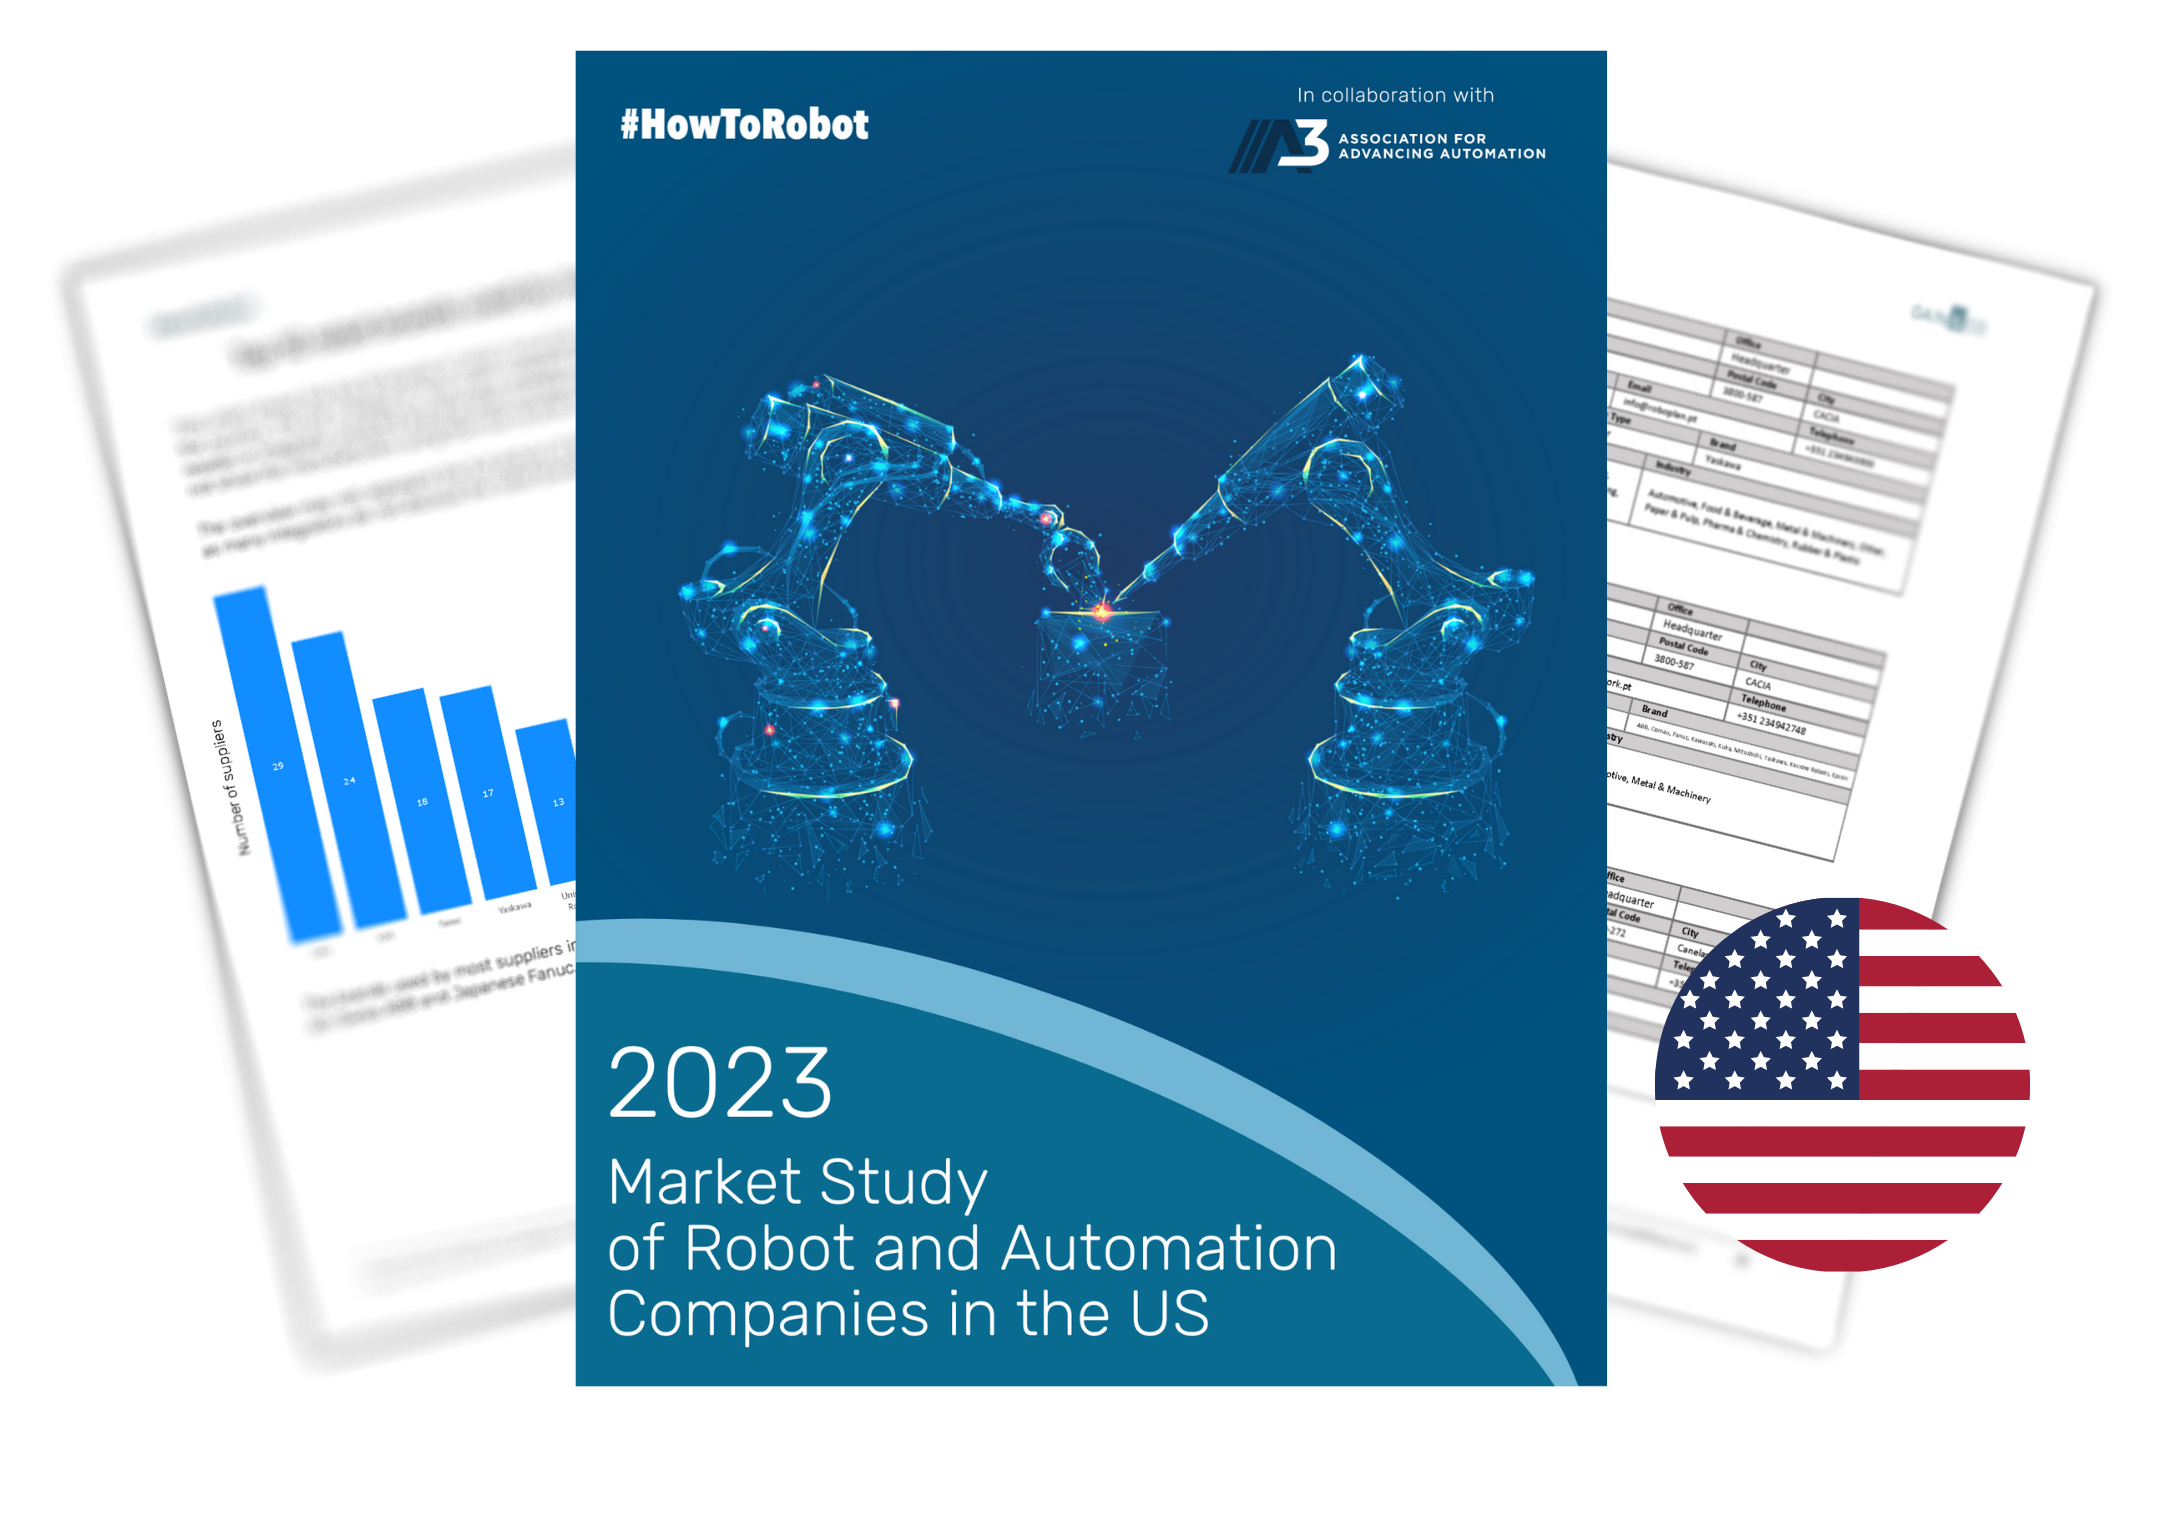 Market Report of Robot and Automation Companies in the US